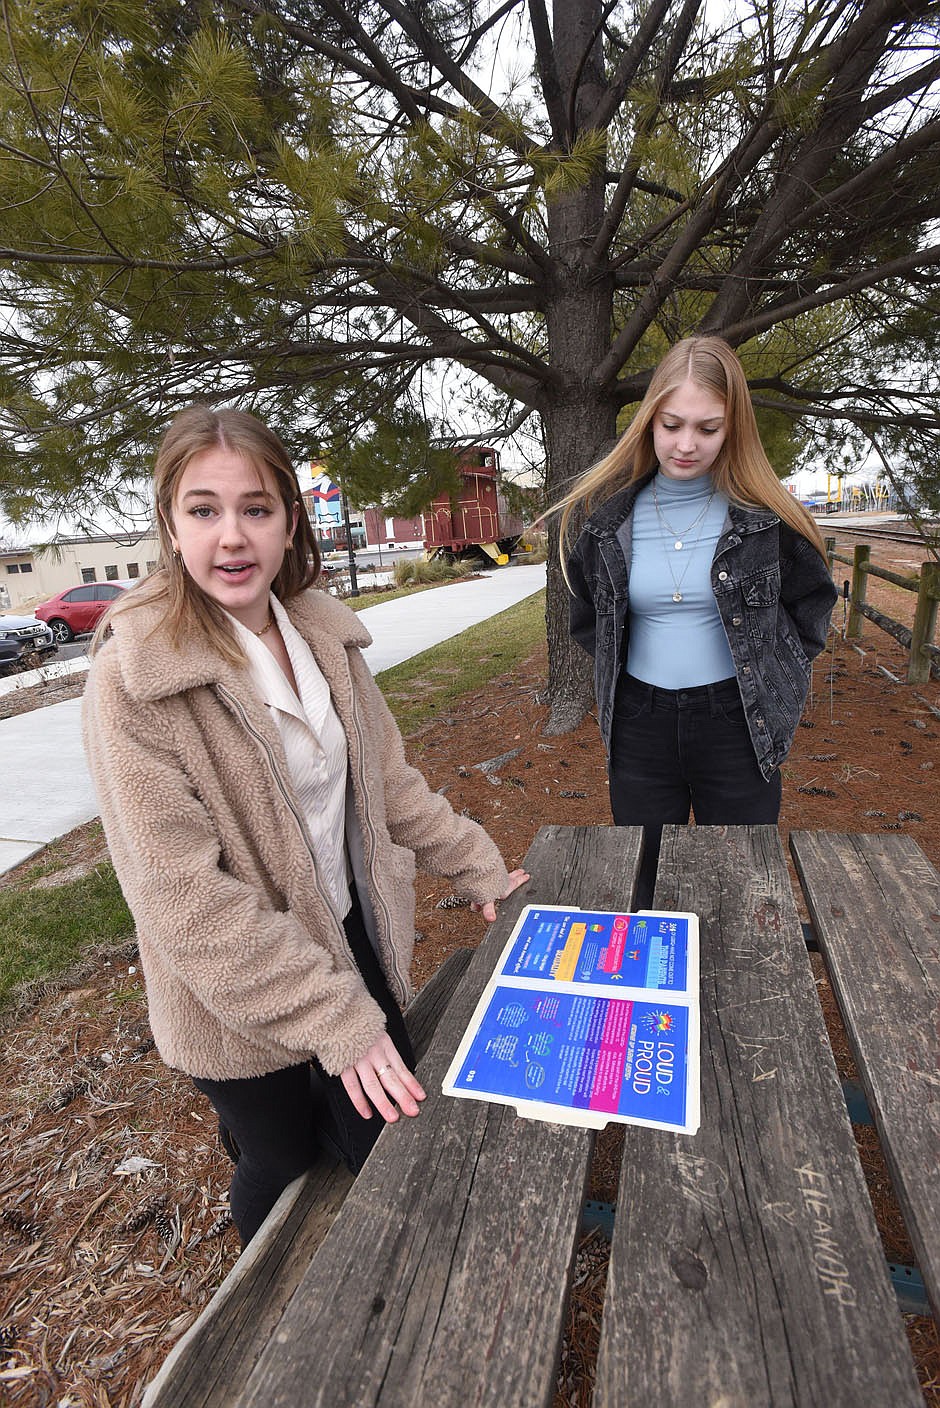 Betty Gower (left), 17, and Grace Henley, 18, talk Saturday Feb. 6 2021 in downtown Rogers about their LGBTQ Rogers High School yearbook proposal.
(NWA Democrat-Gazette/Flip Putthoff)